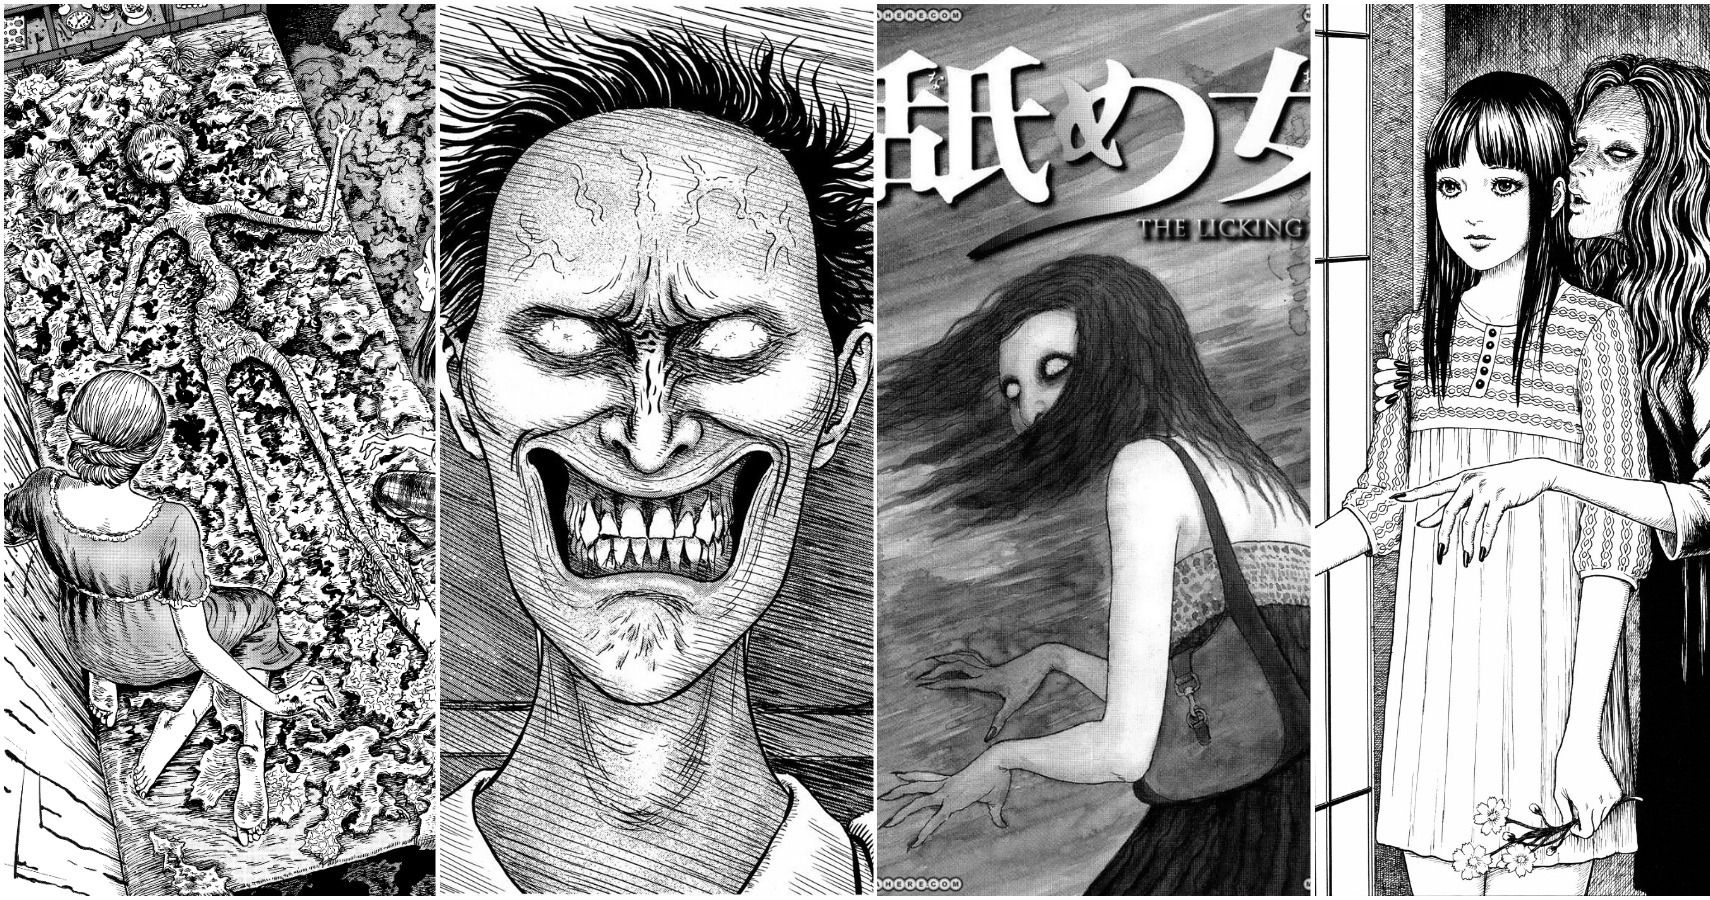 The 15 Scariest Junji Ito Stories, Ranked